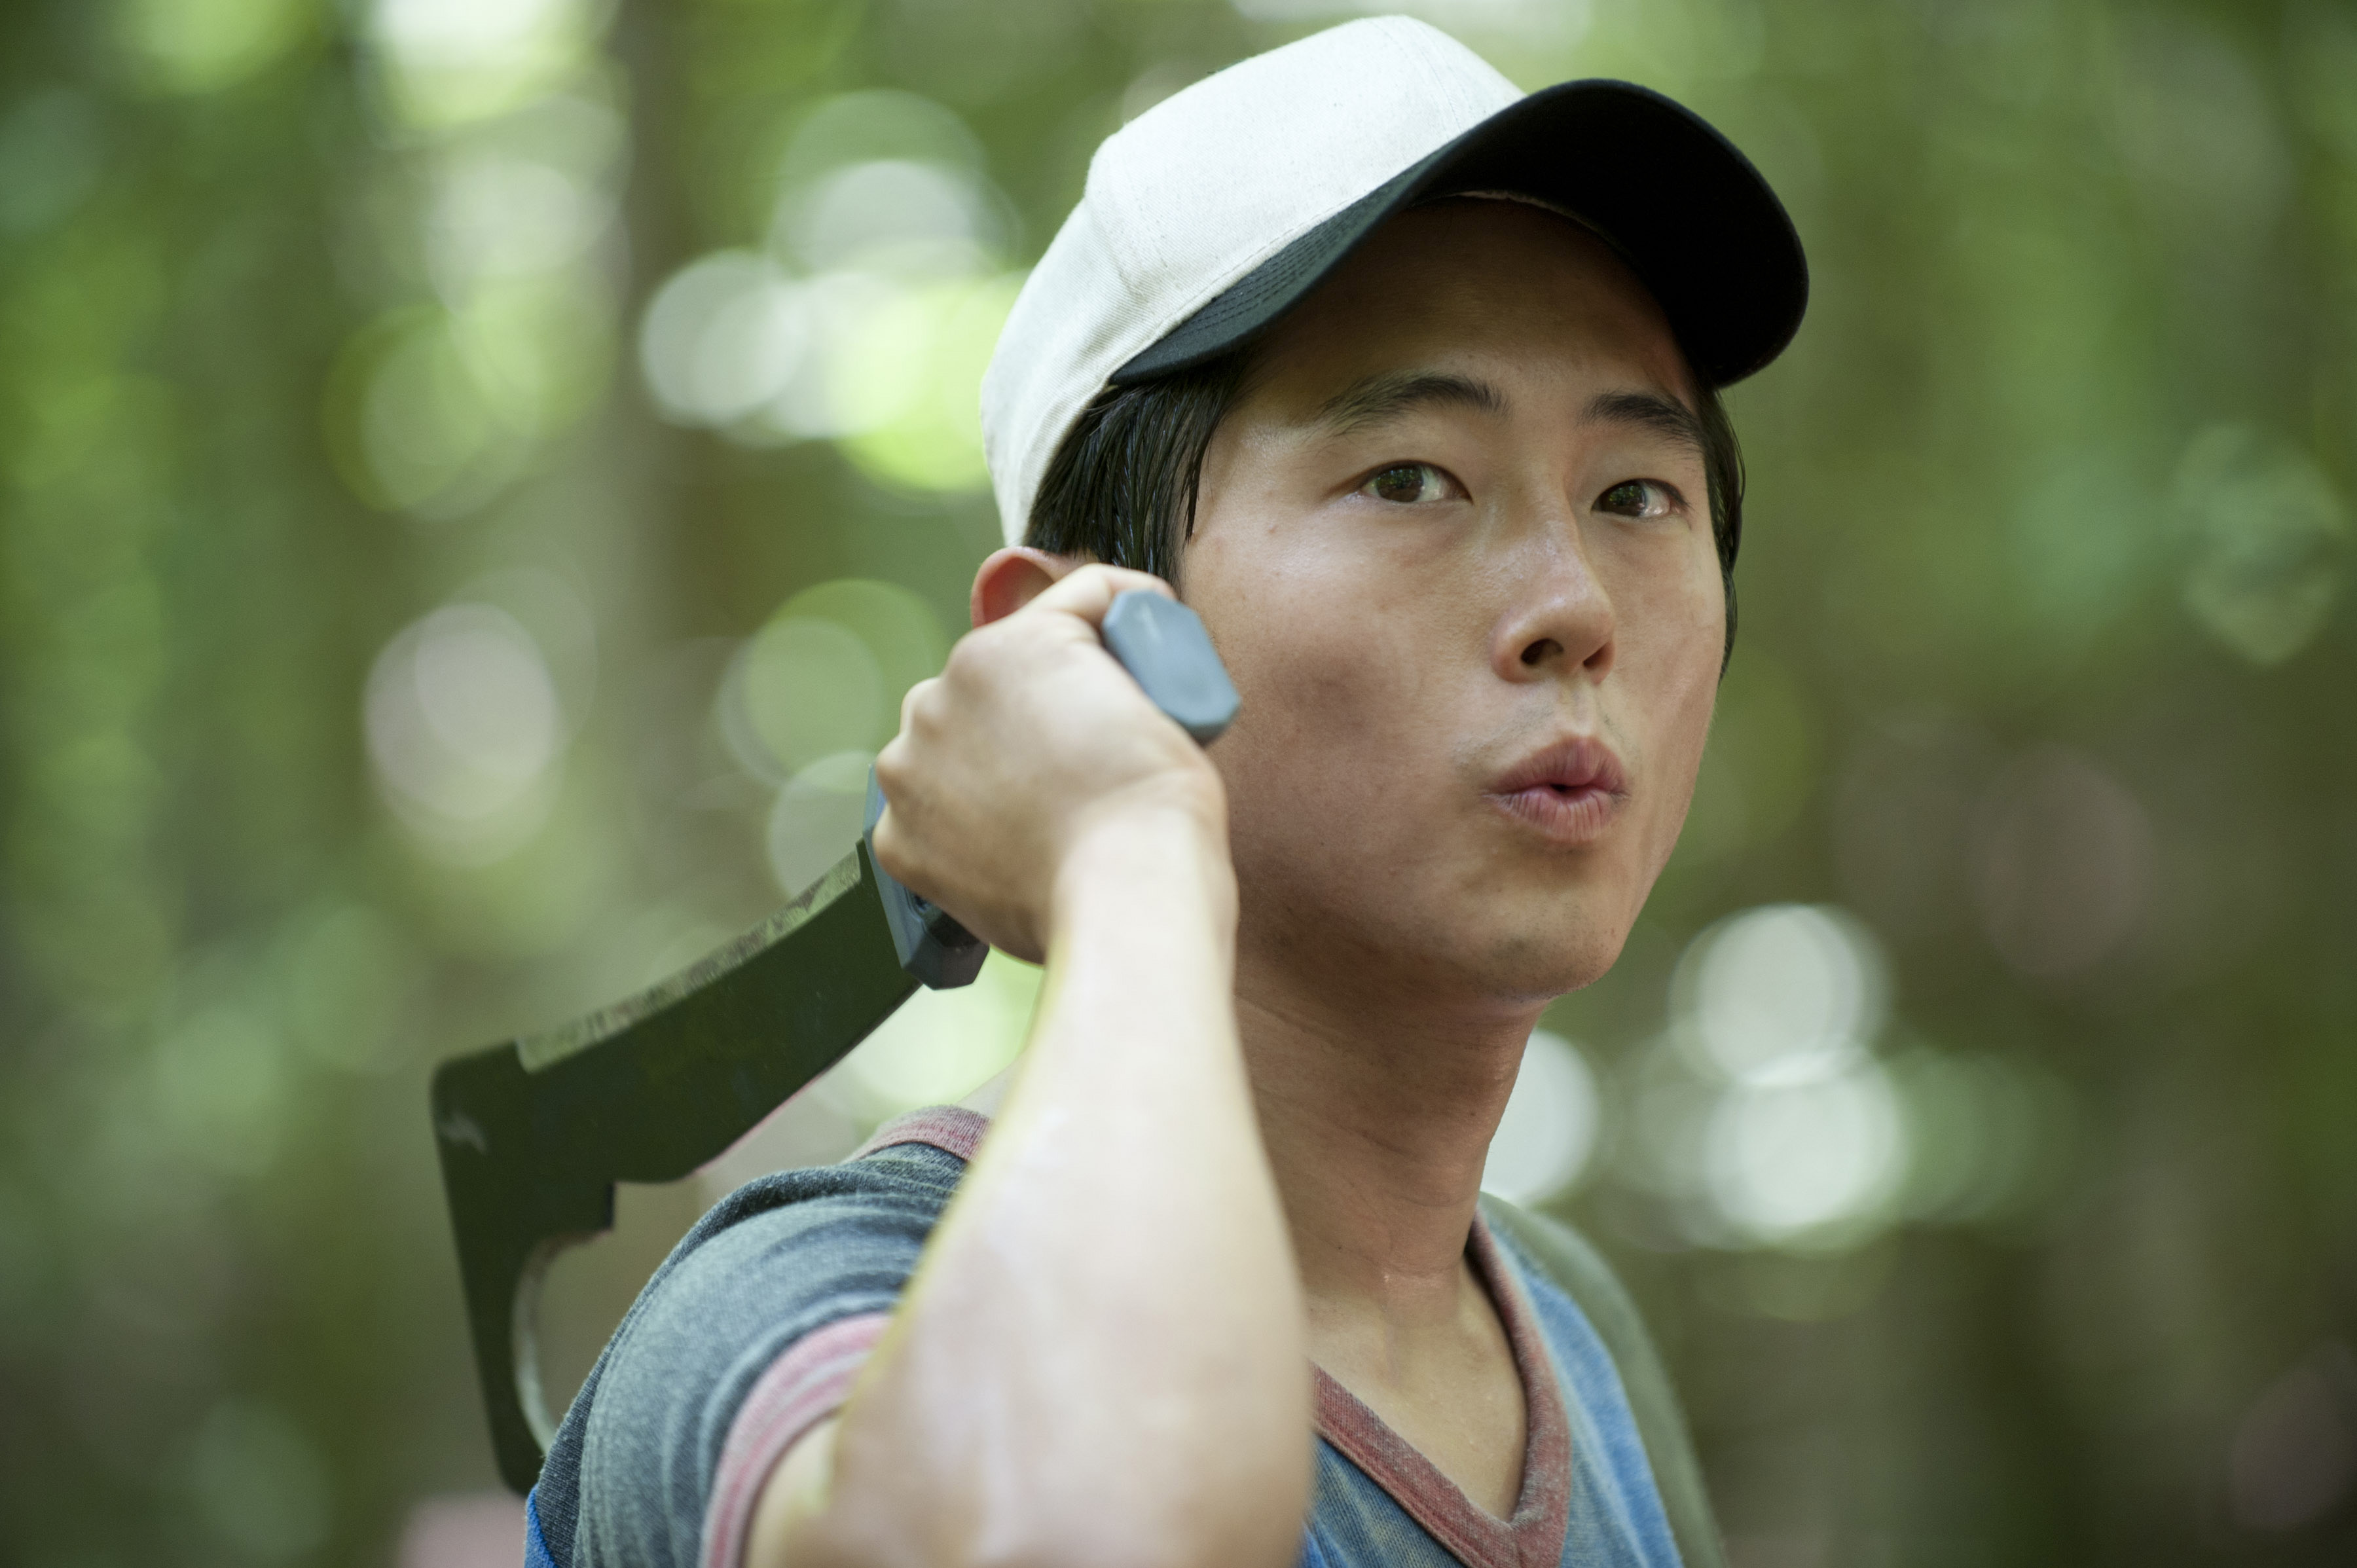 Glenn rhee hd papers and backgrounds